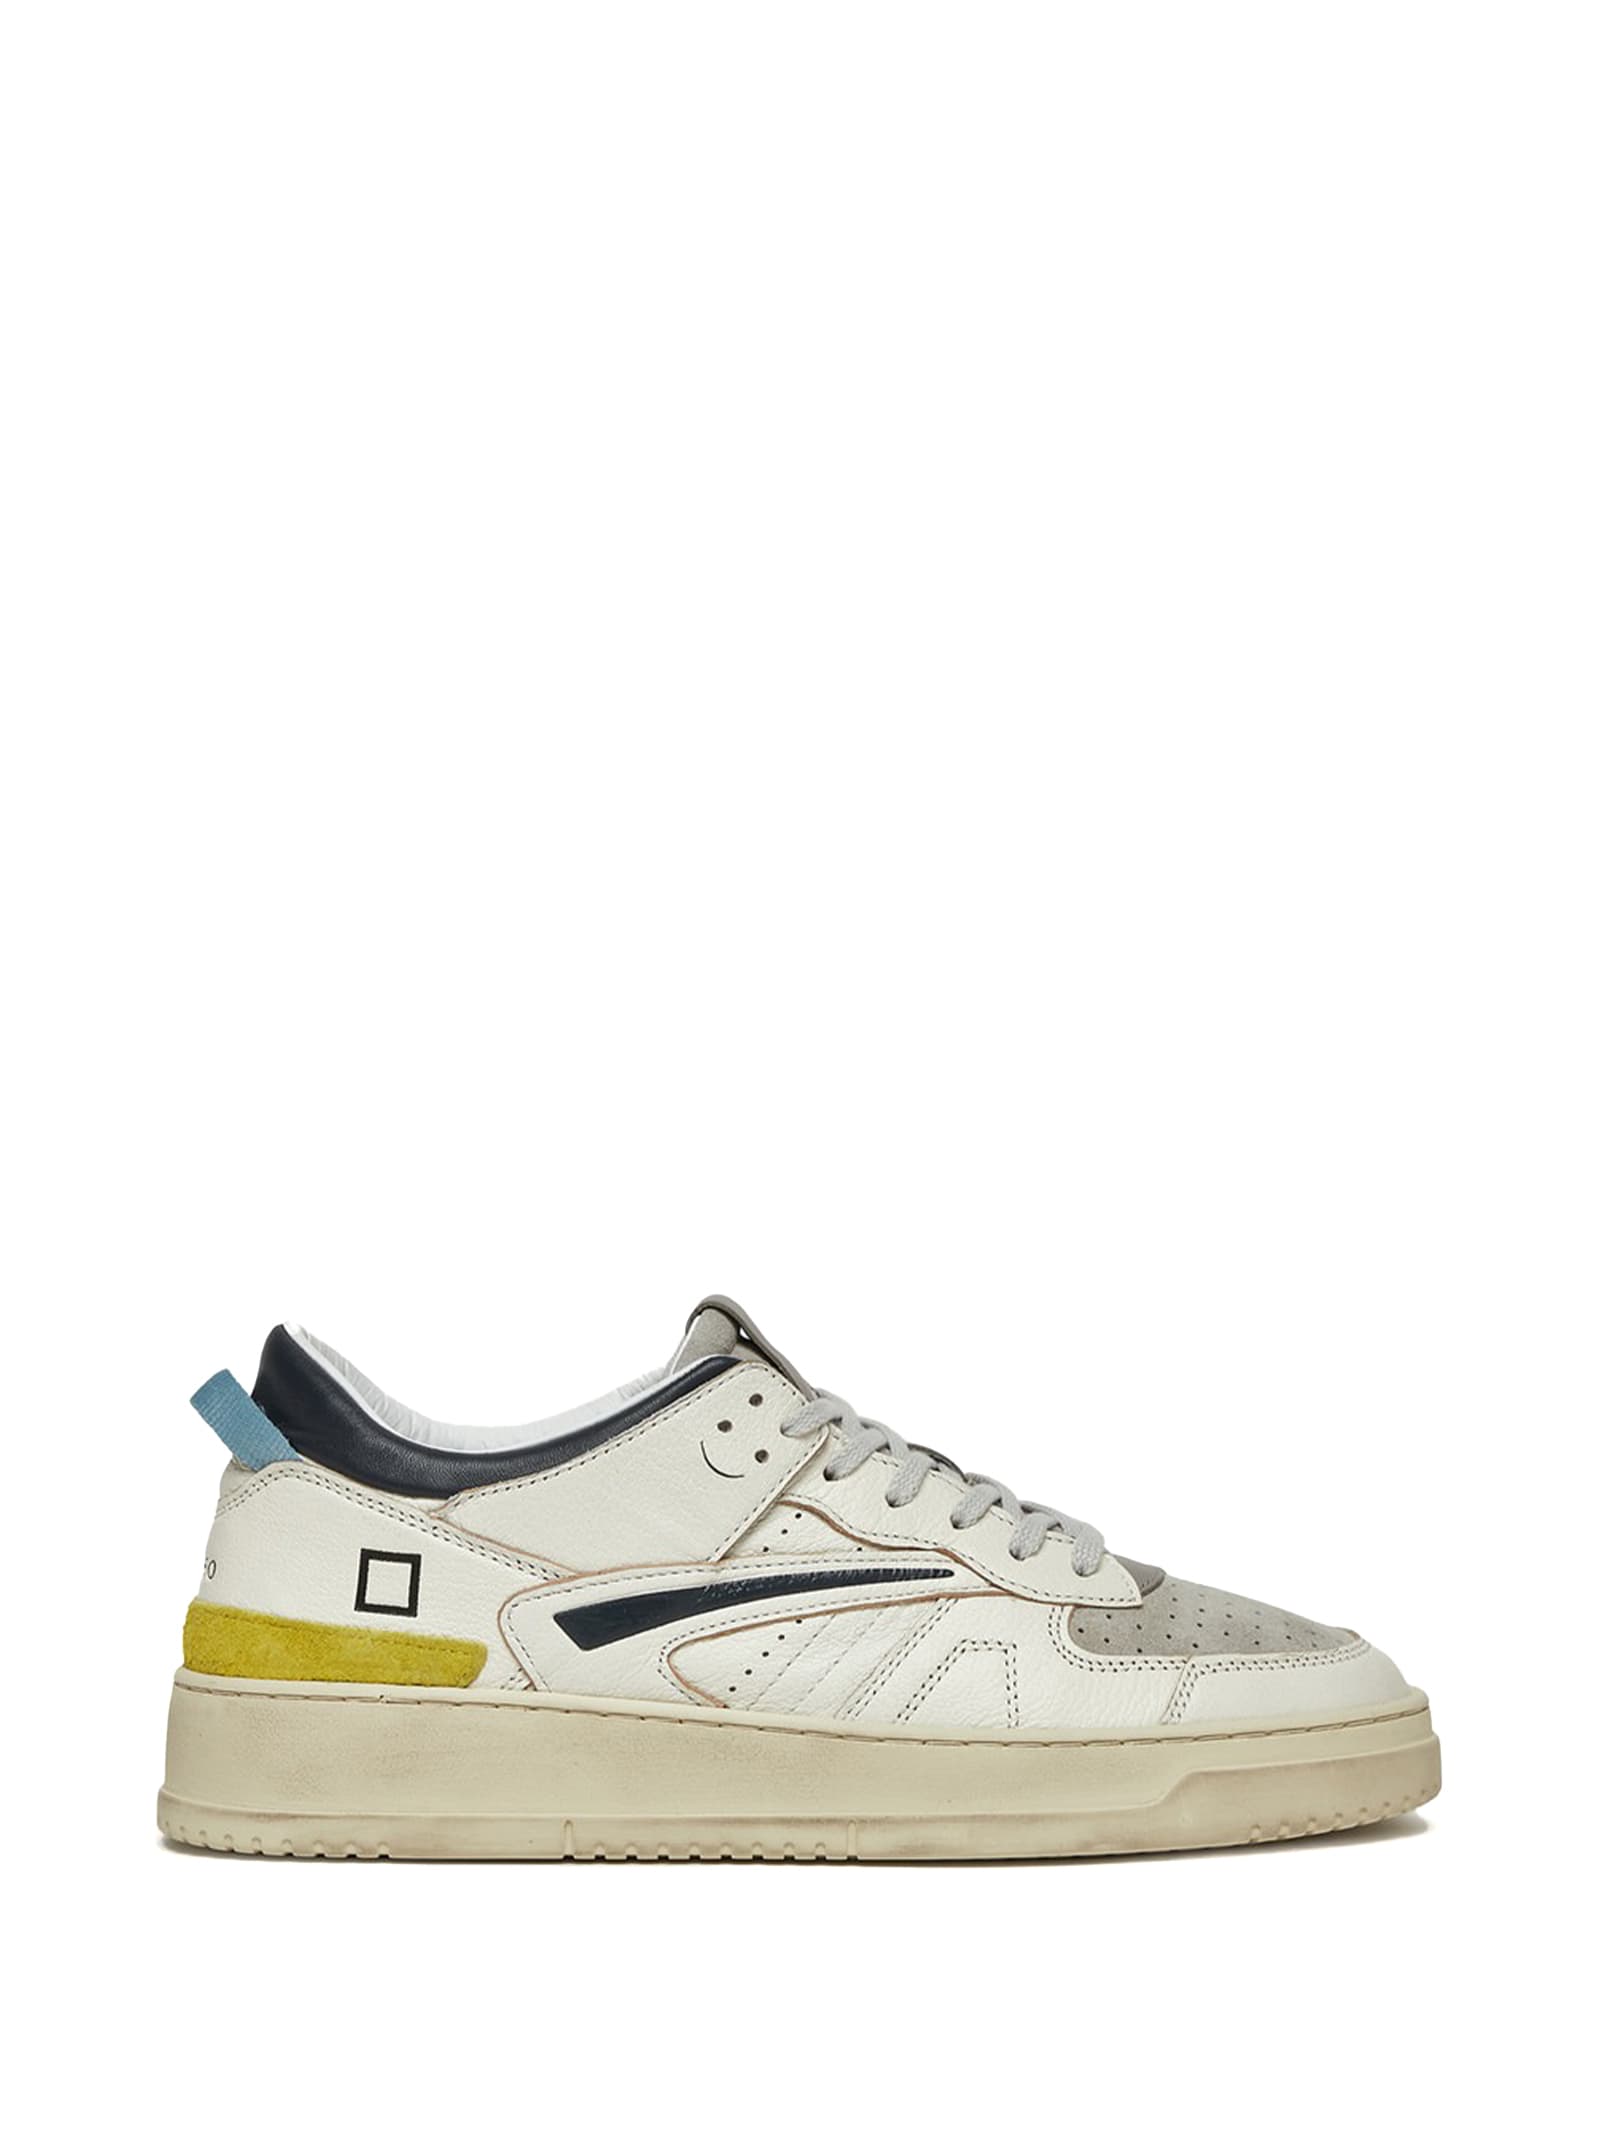 Torneo Mens Leather Sneaker